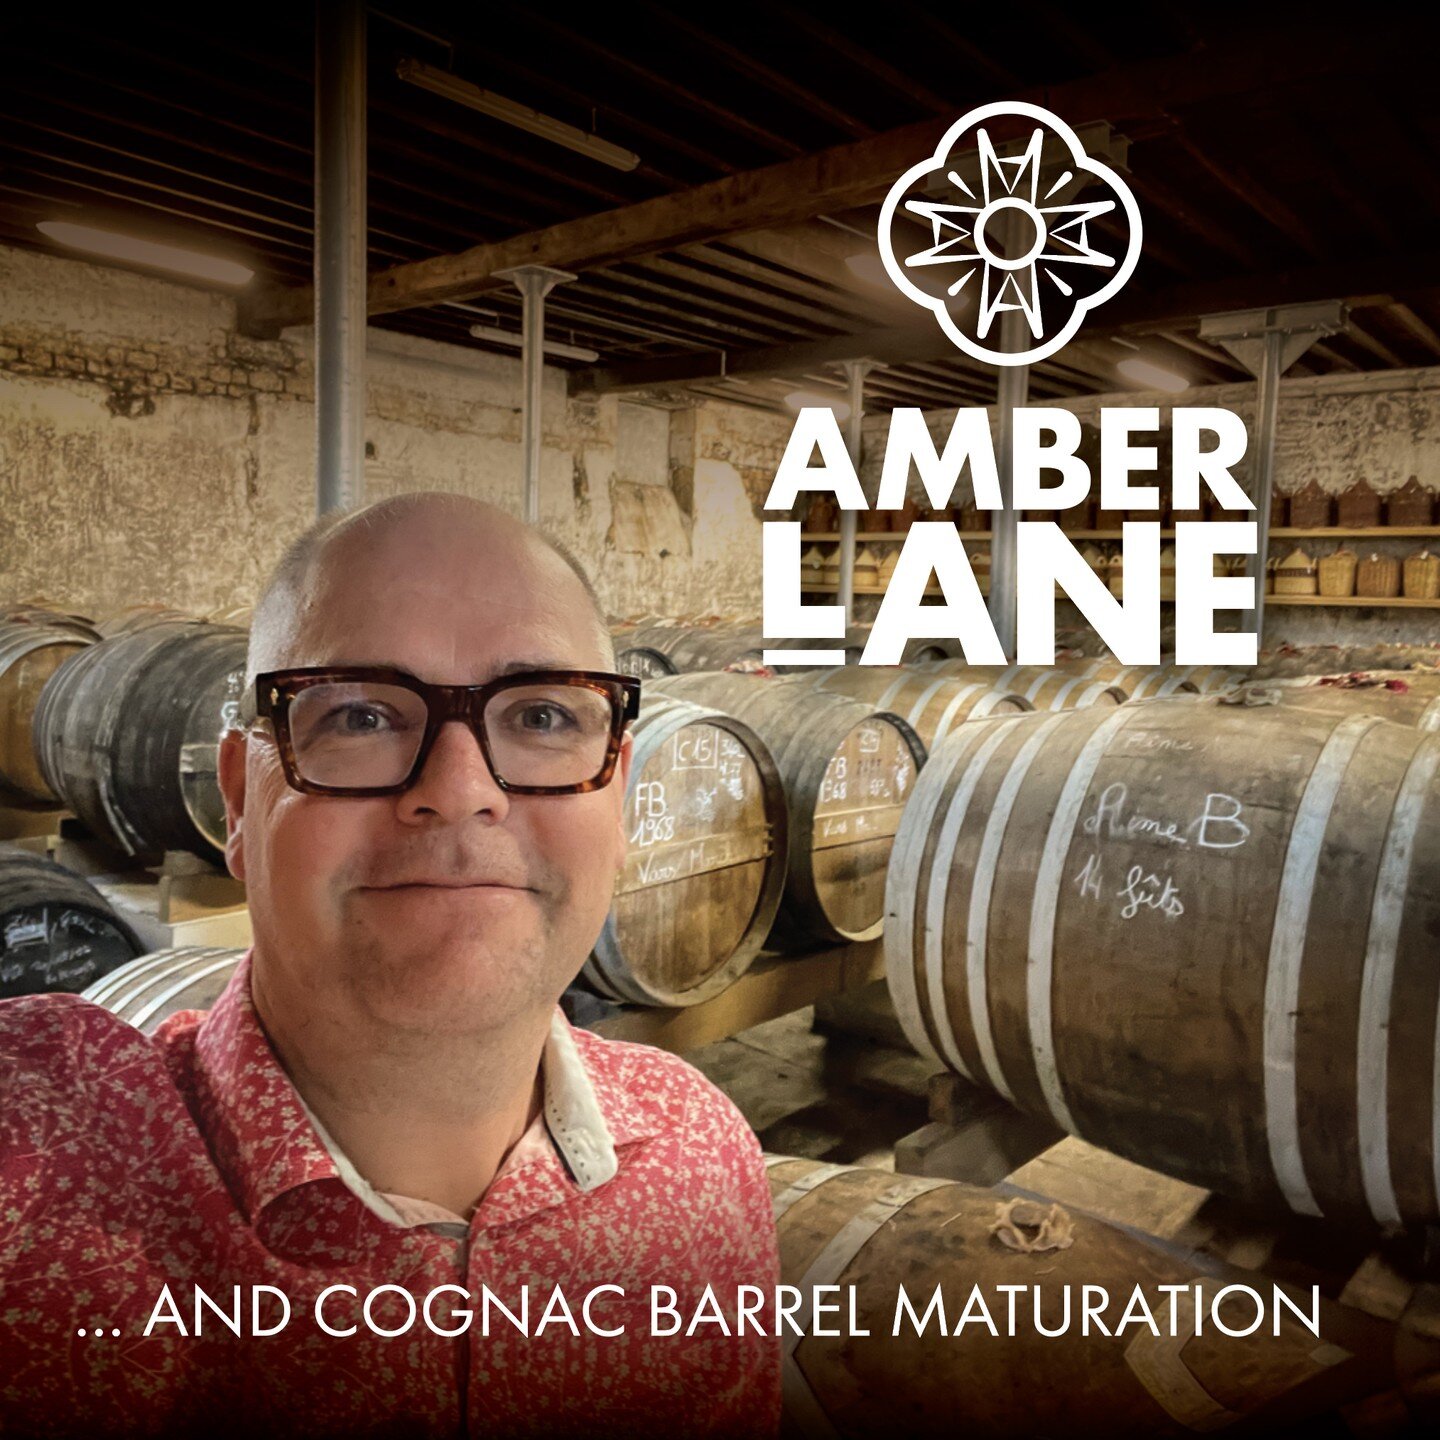 Amber Lane&rsquo;s whisky style is inspired by the Cognac tradition from south-west France. Using techniques learned from world class producers like Hennessy, Martell and Jean Fillioux, our focus is on creating layers of flavour by progressing spirit